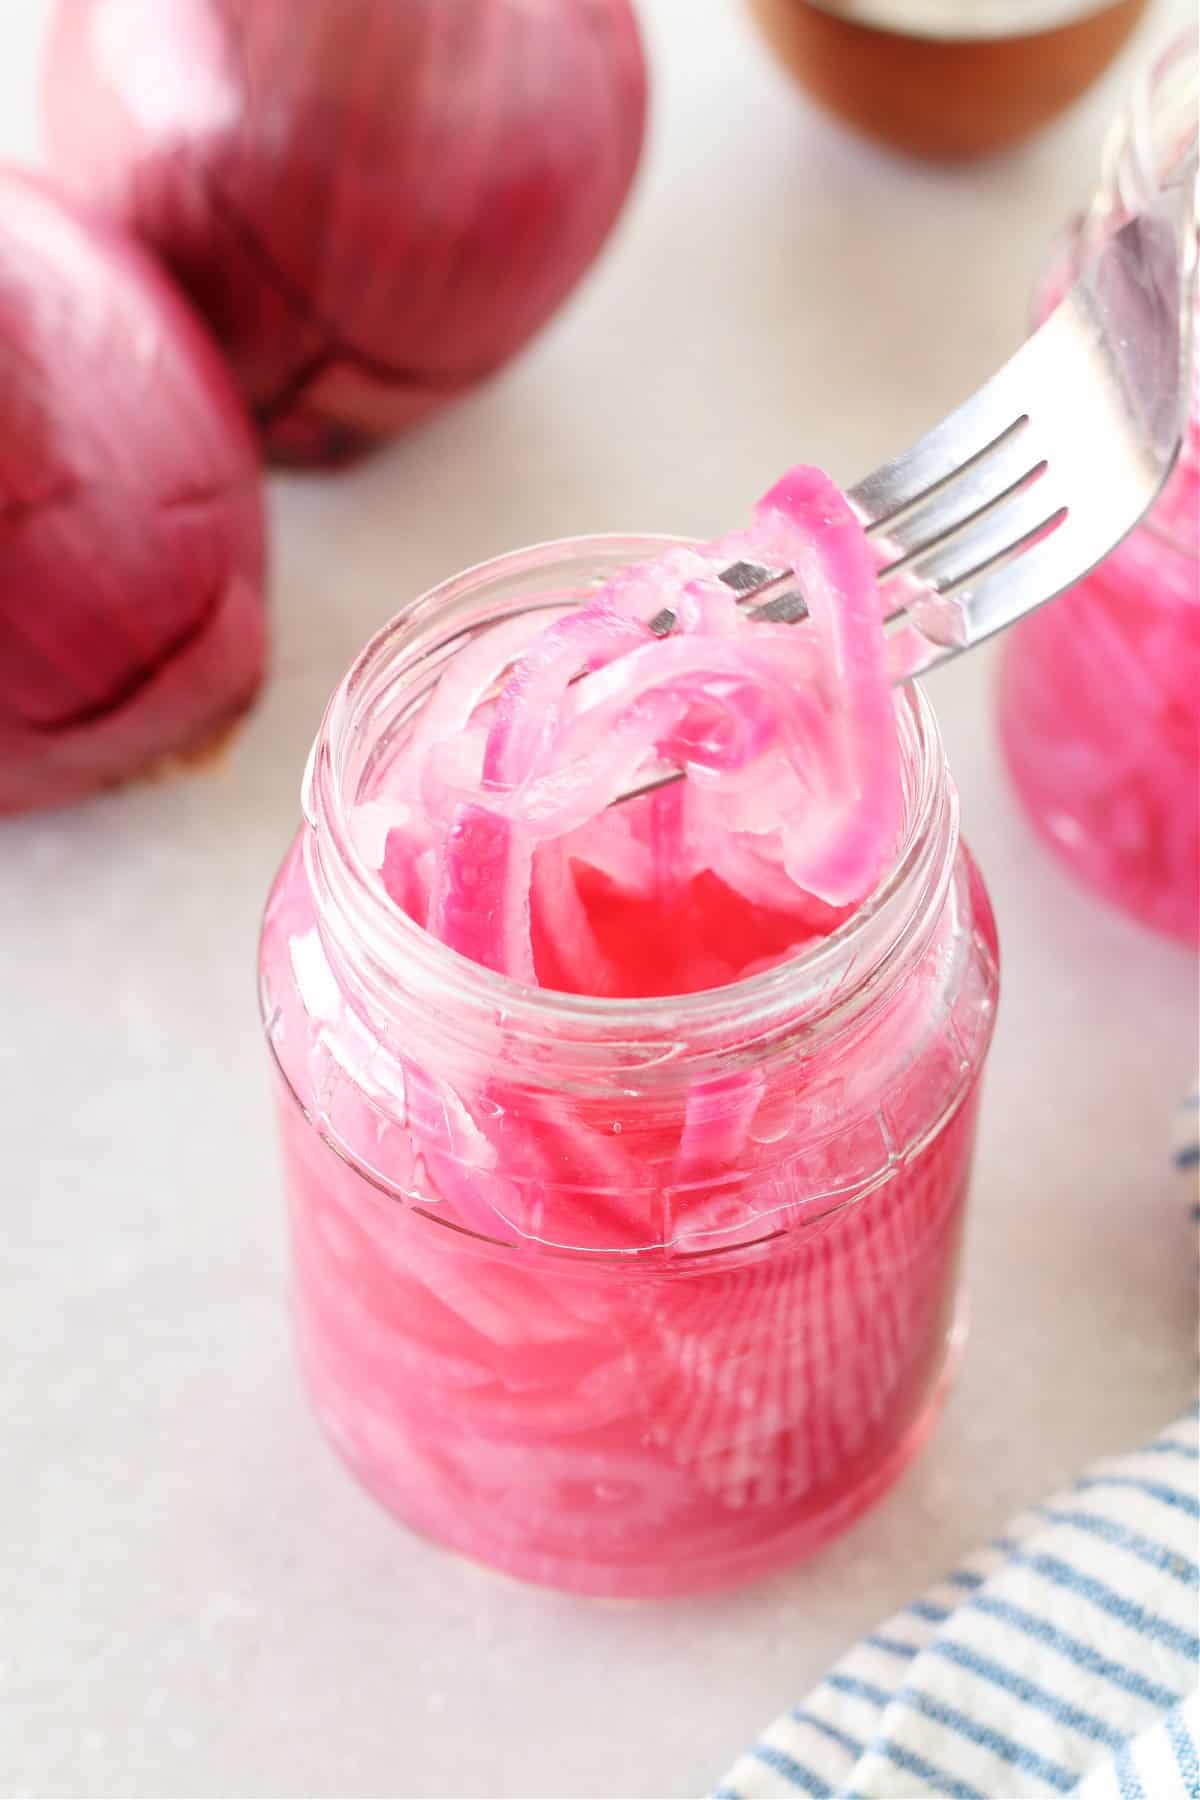 Pickled red onions in a jar and lifted on a fork.